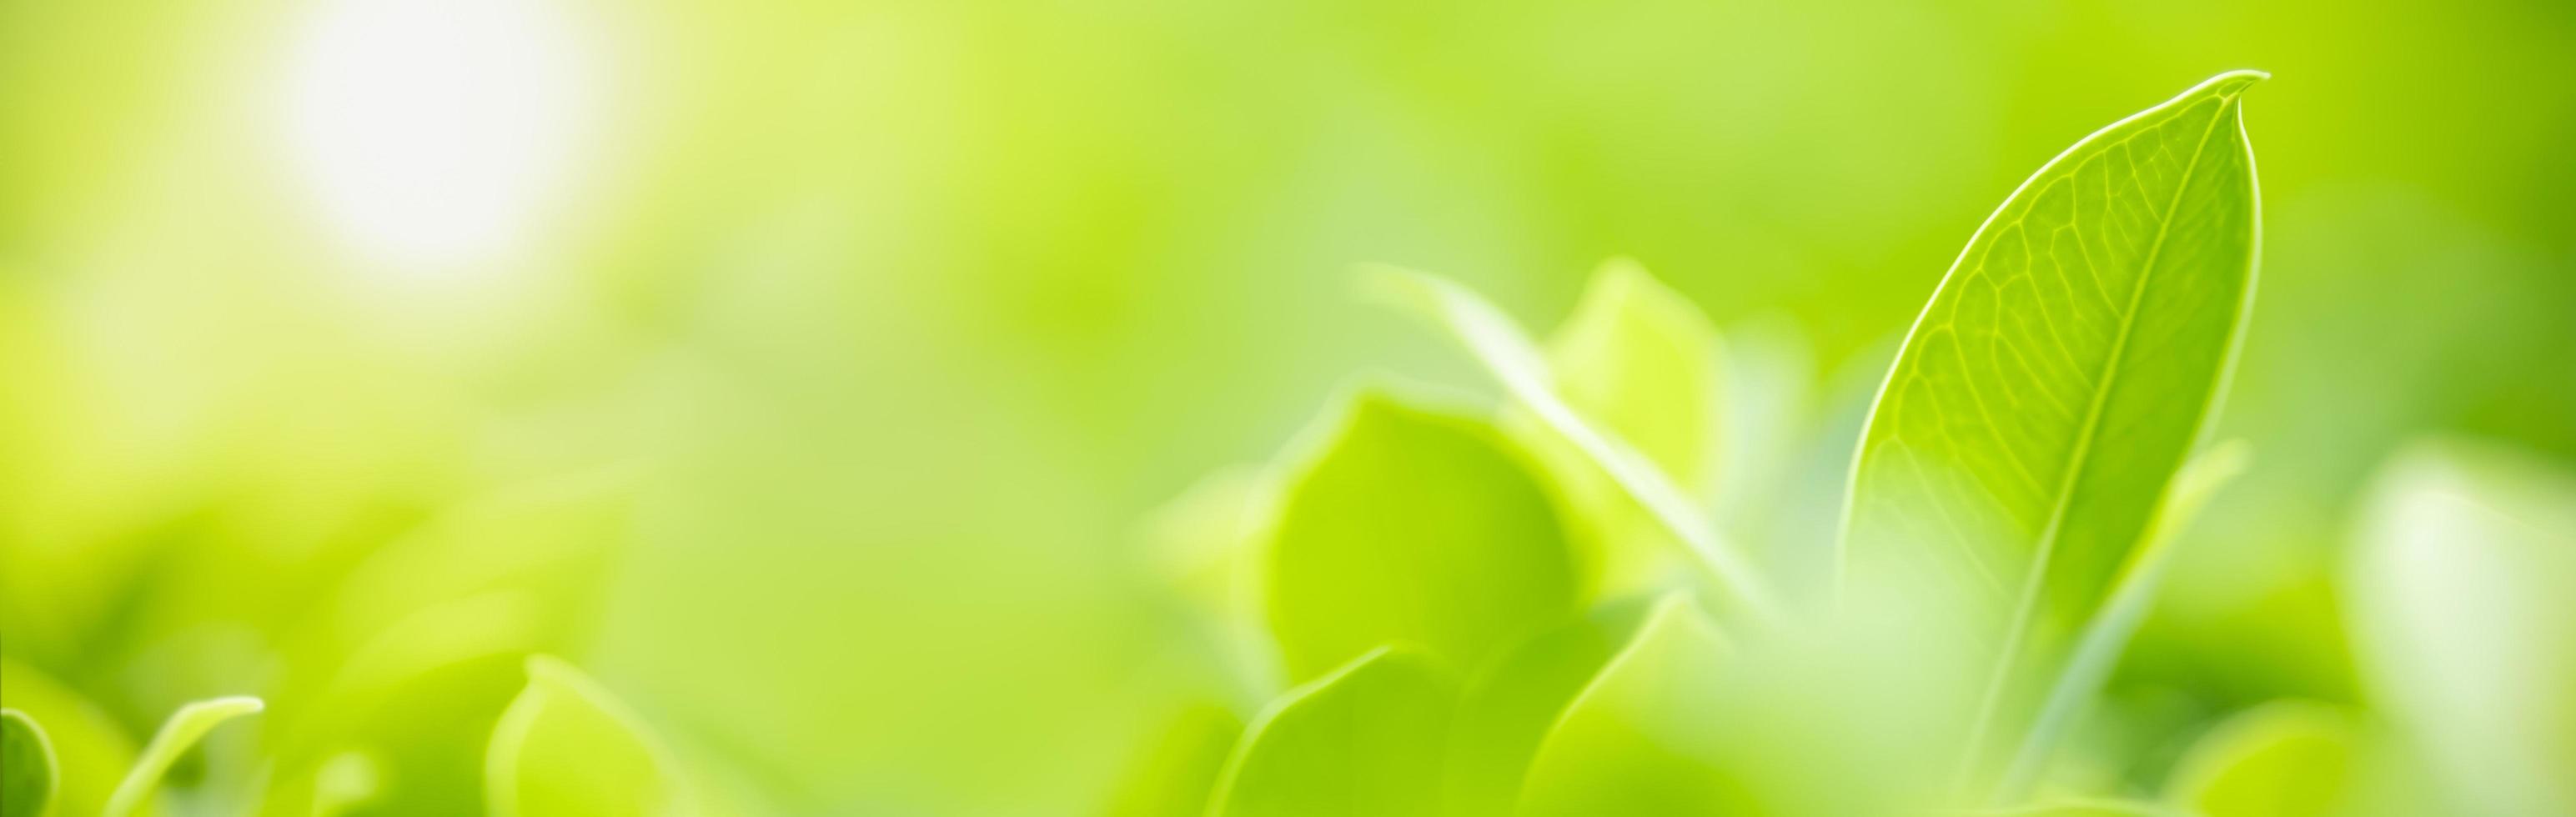 Close up of nature view green leaf on blurred greenery background under sunlight with bokeh and copy space using as background natural plants landscape, ecology cover concept. photo